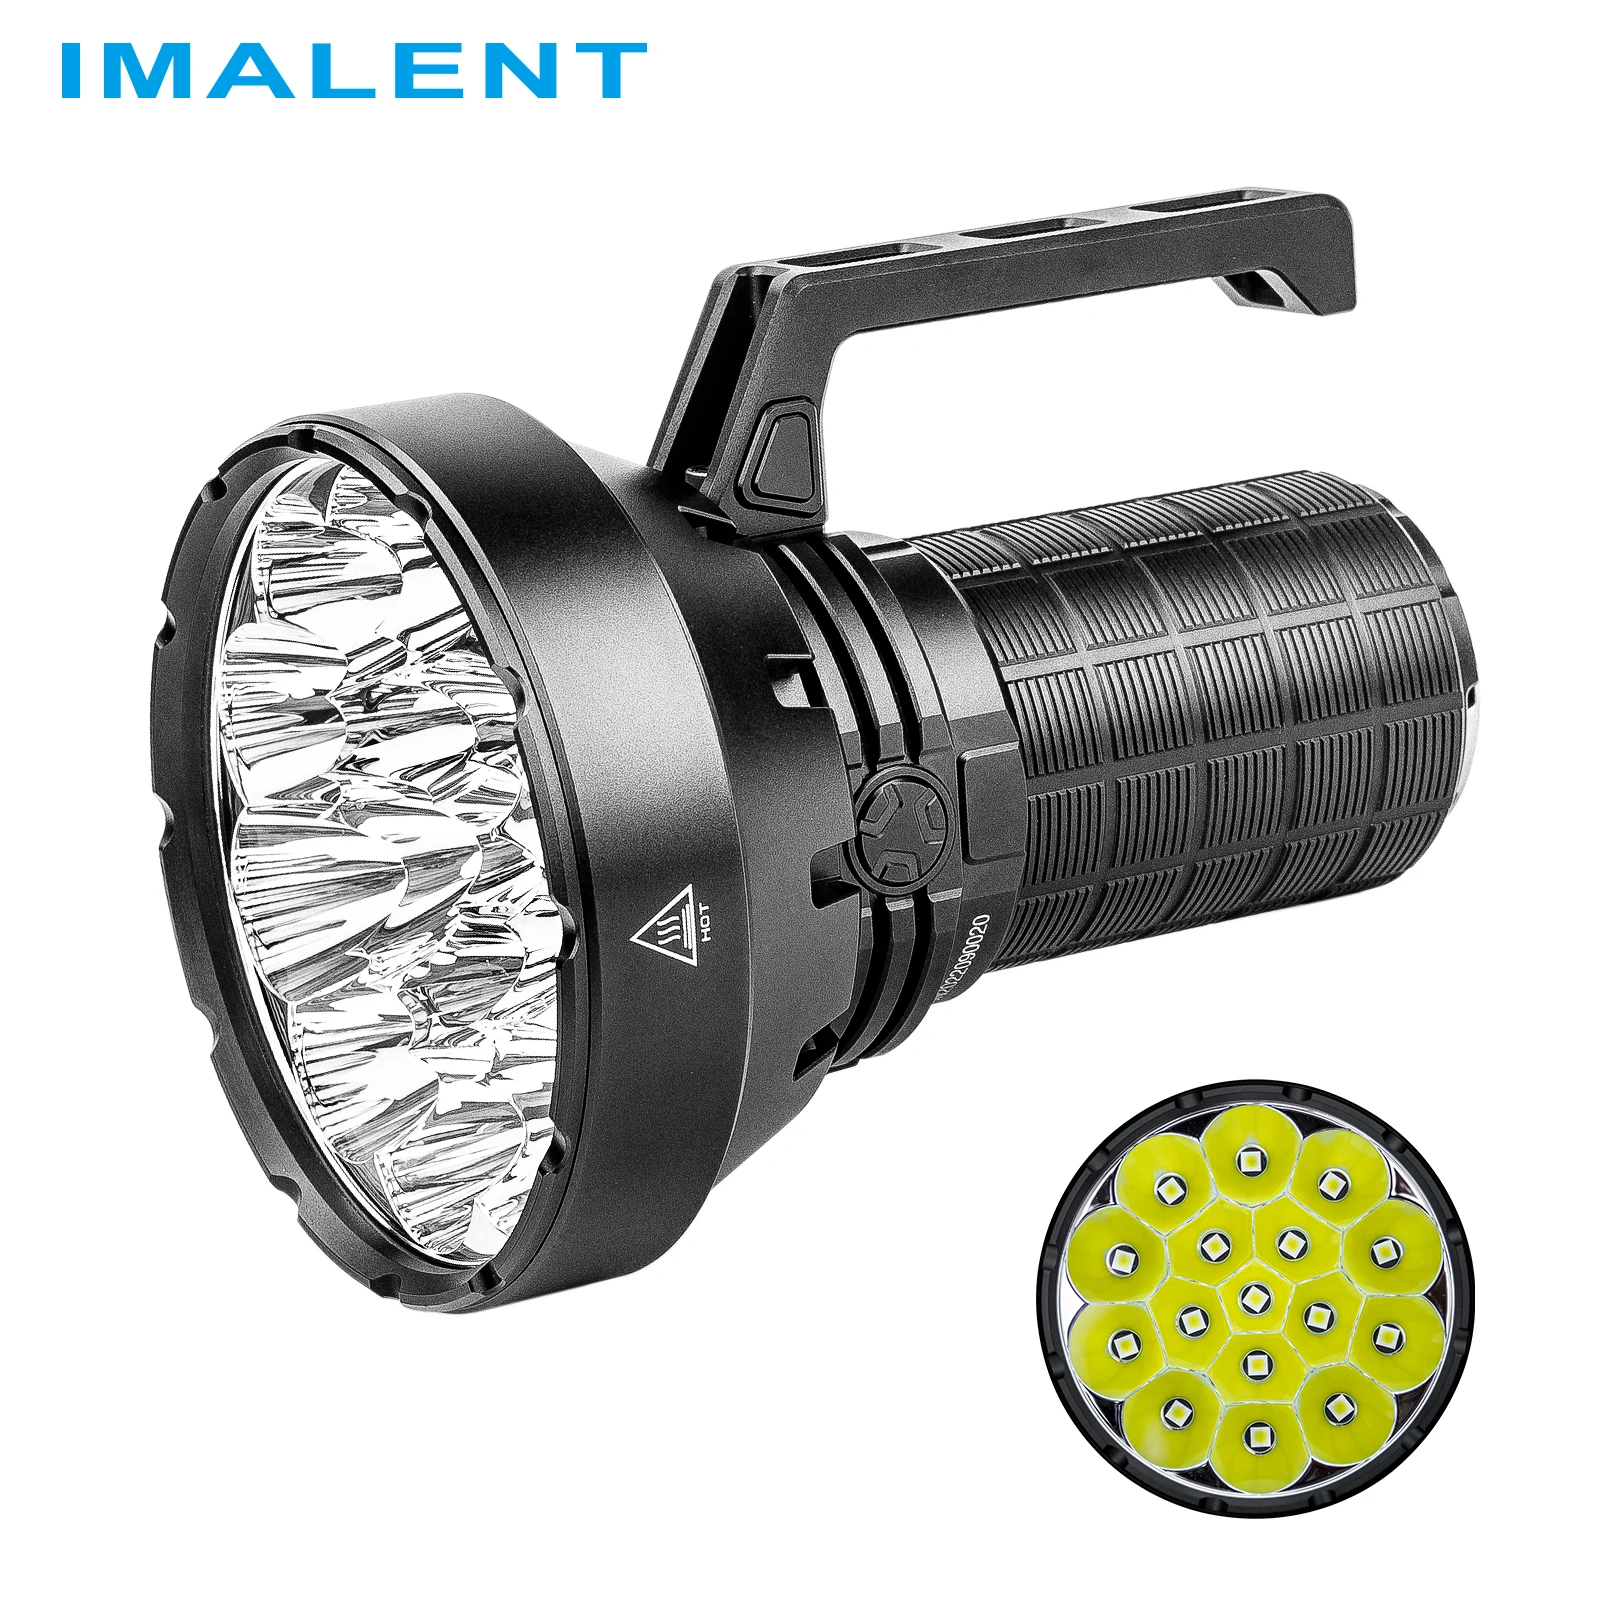 IMALENT SR16 Powerful Flashlight 55000Lumens CREE XHP 50.3 LED Rechargeable Super Bright Tactical Torch for Hunting Self Defense